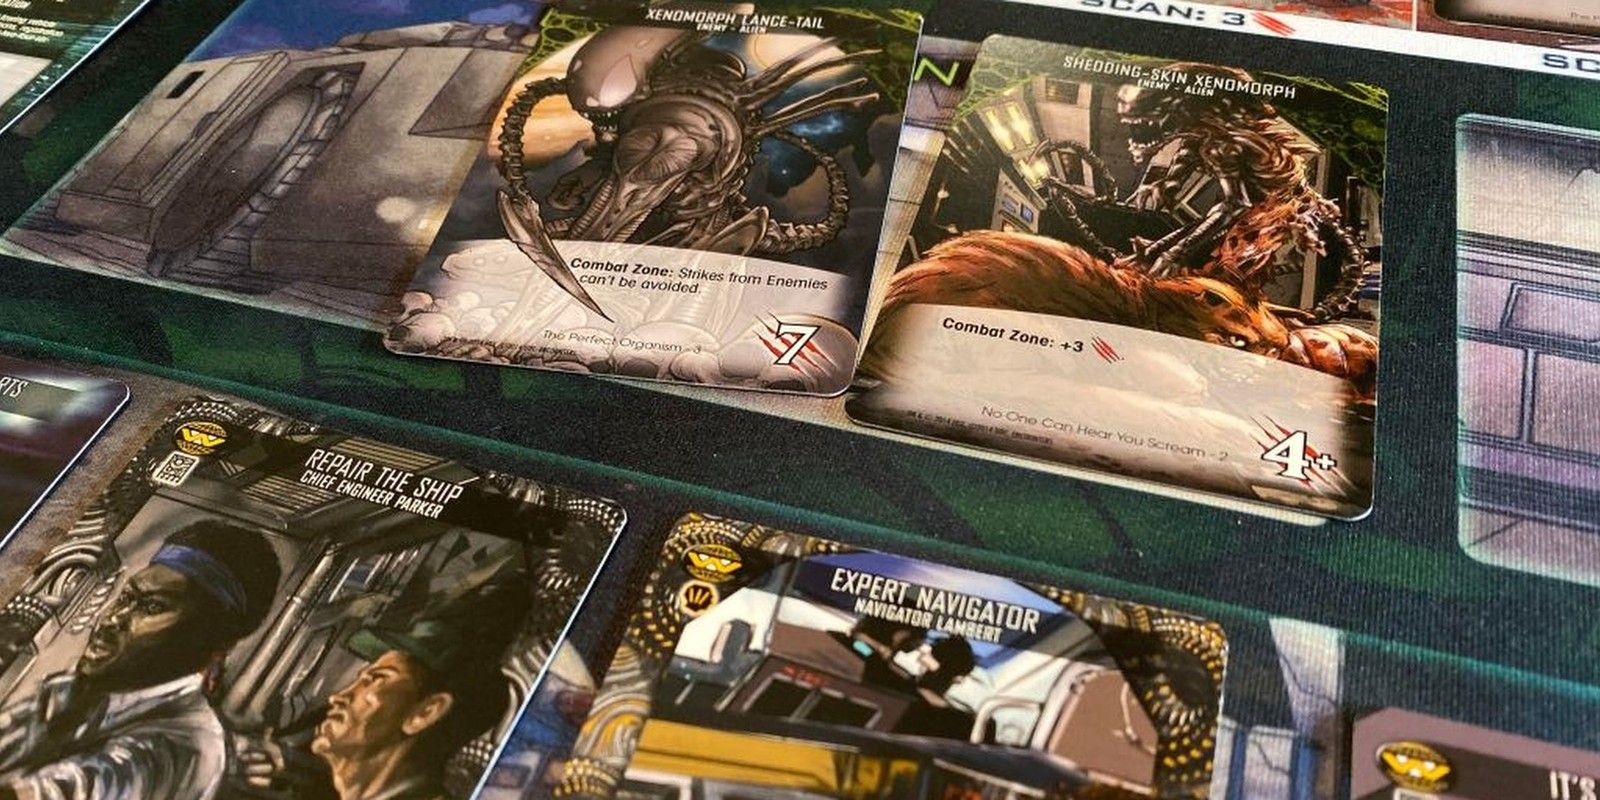 Legendary Encounters Alien Deck-Building Game Being Played On The Table